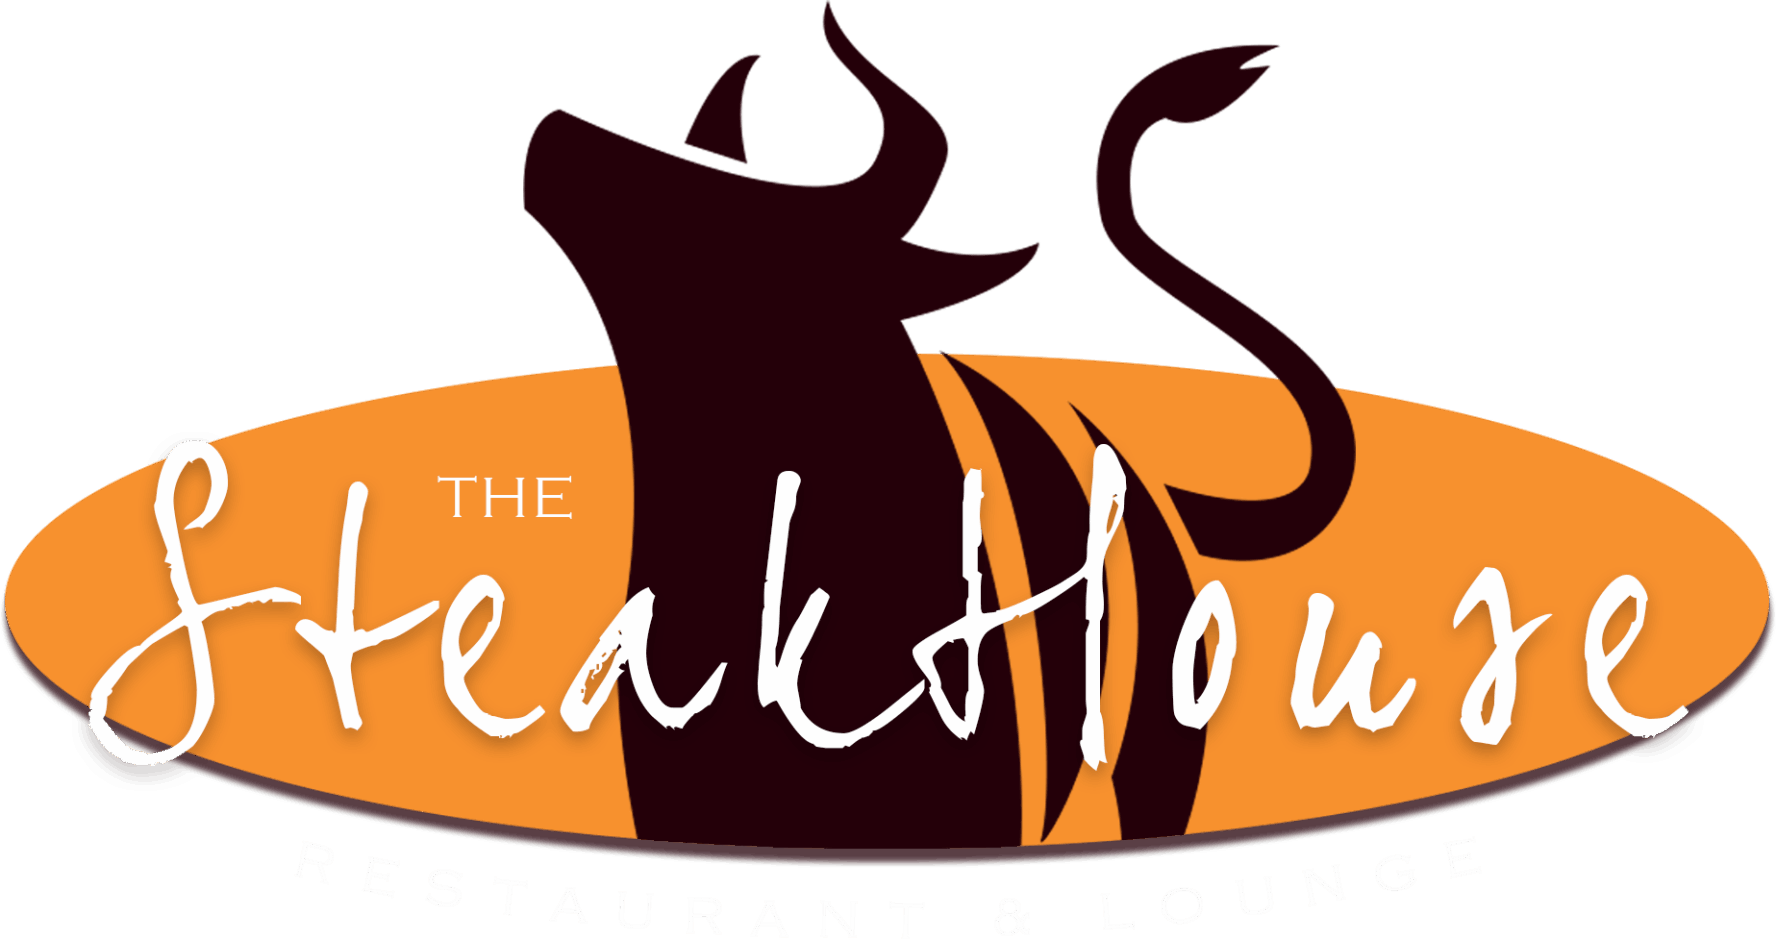 Our menu offers everything from award winning barbeque ribs to hand cut Certified Angus Beef steaks. The casual setting is a great place for dining with family and friends. Look forward to daily lunch and dinner specials and make sure to leave room for dessert!.